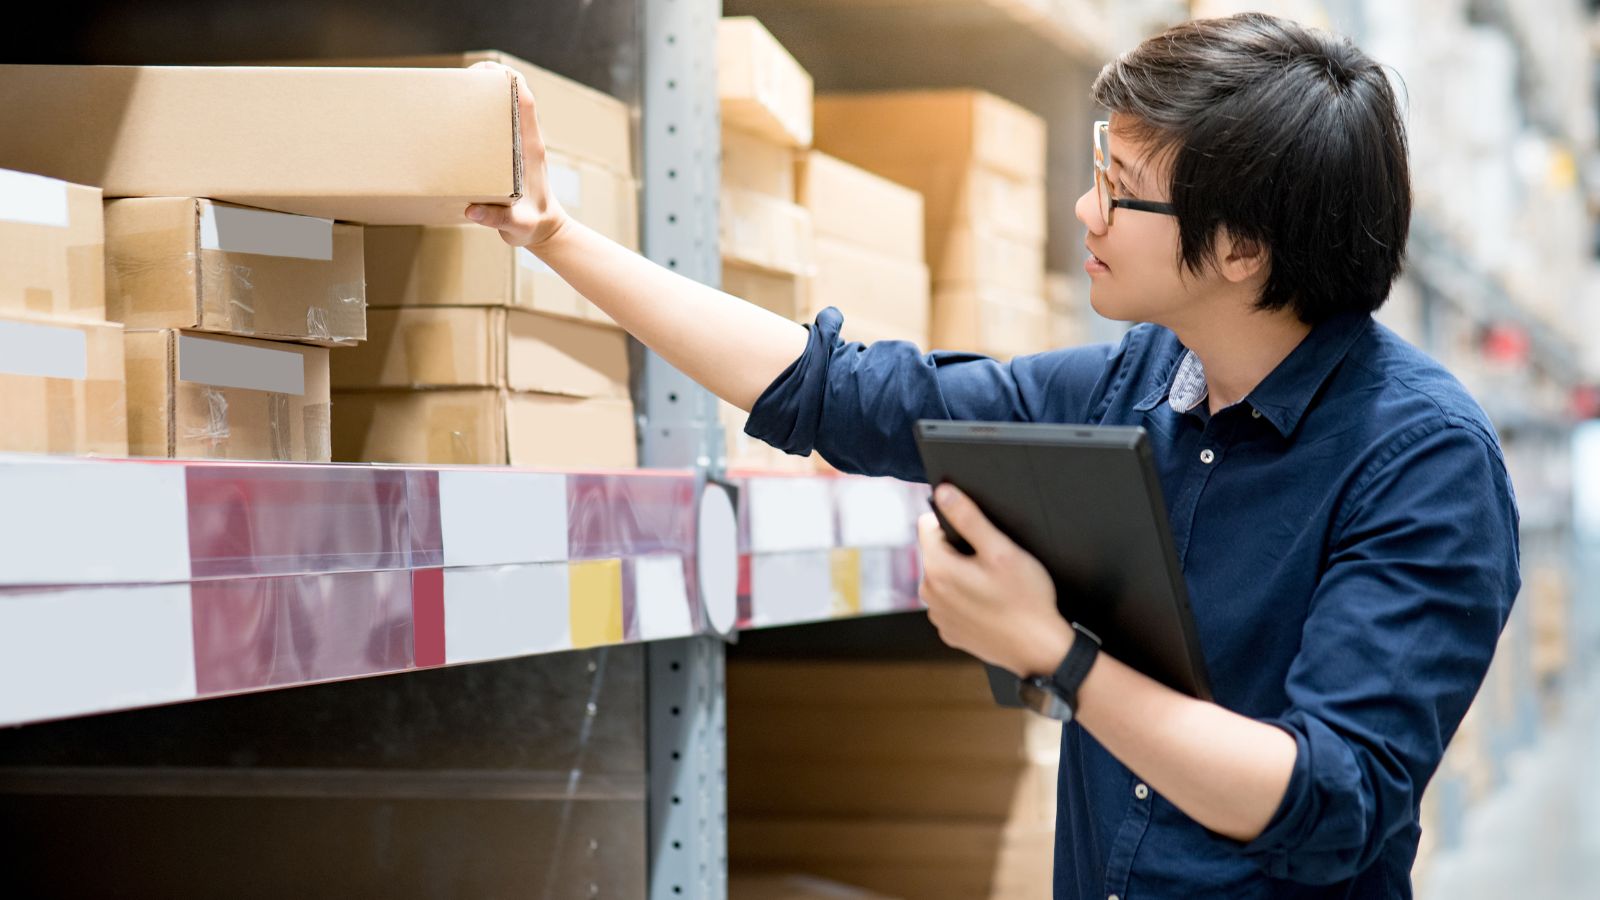 Inventory management methods are the process of ensuring that businesses have adequate stock levels to meet customer demand.